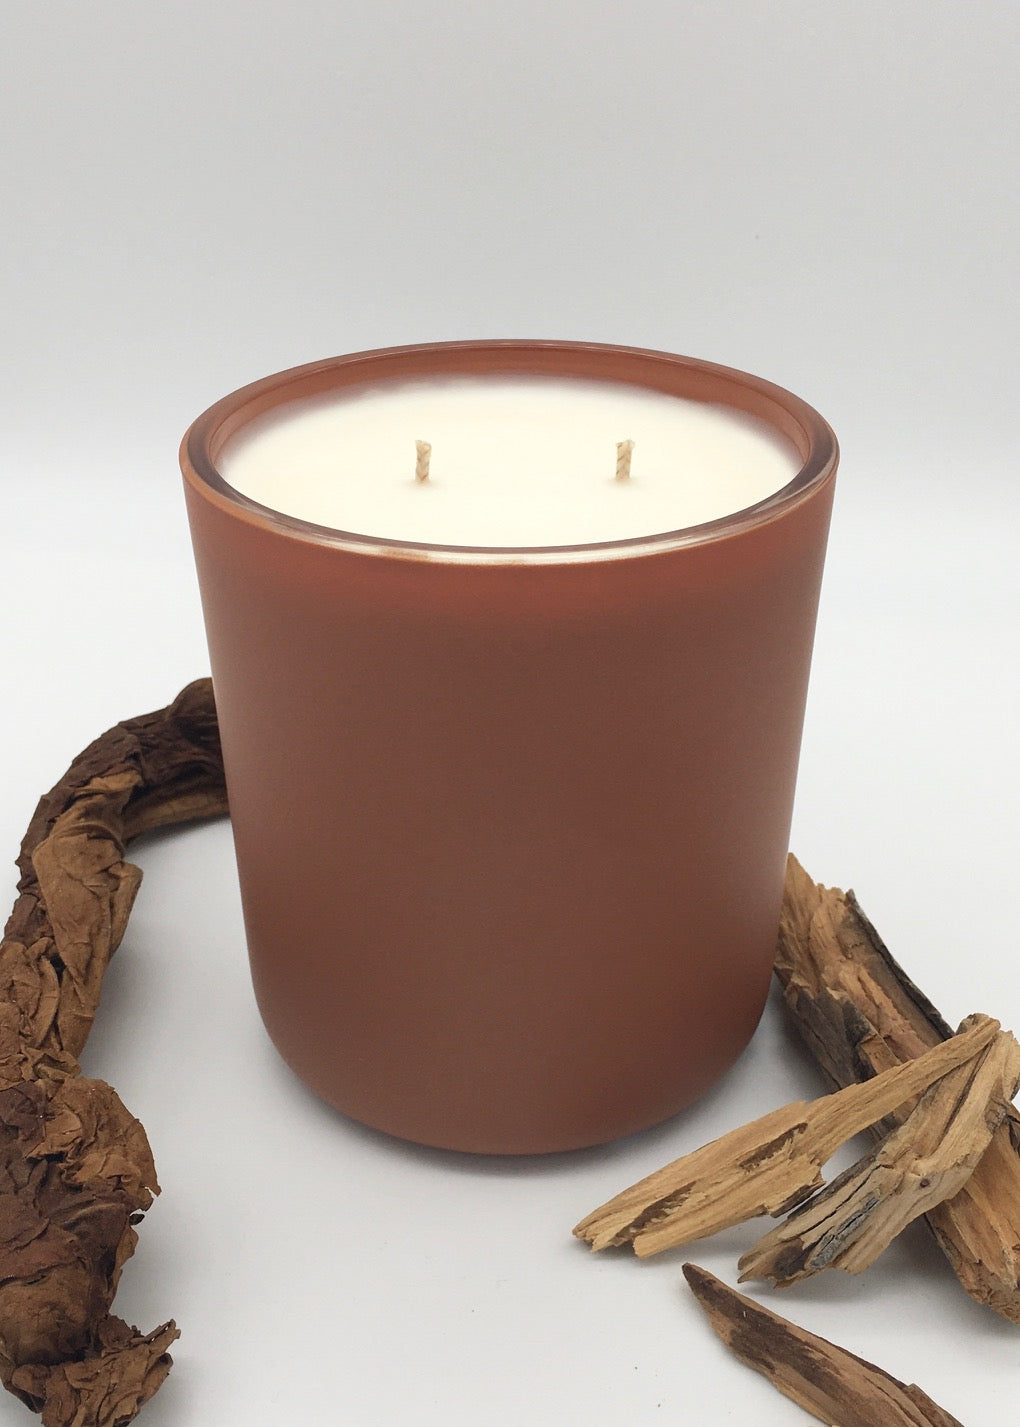 Tobacco Candle